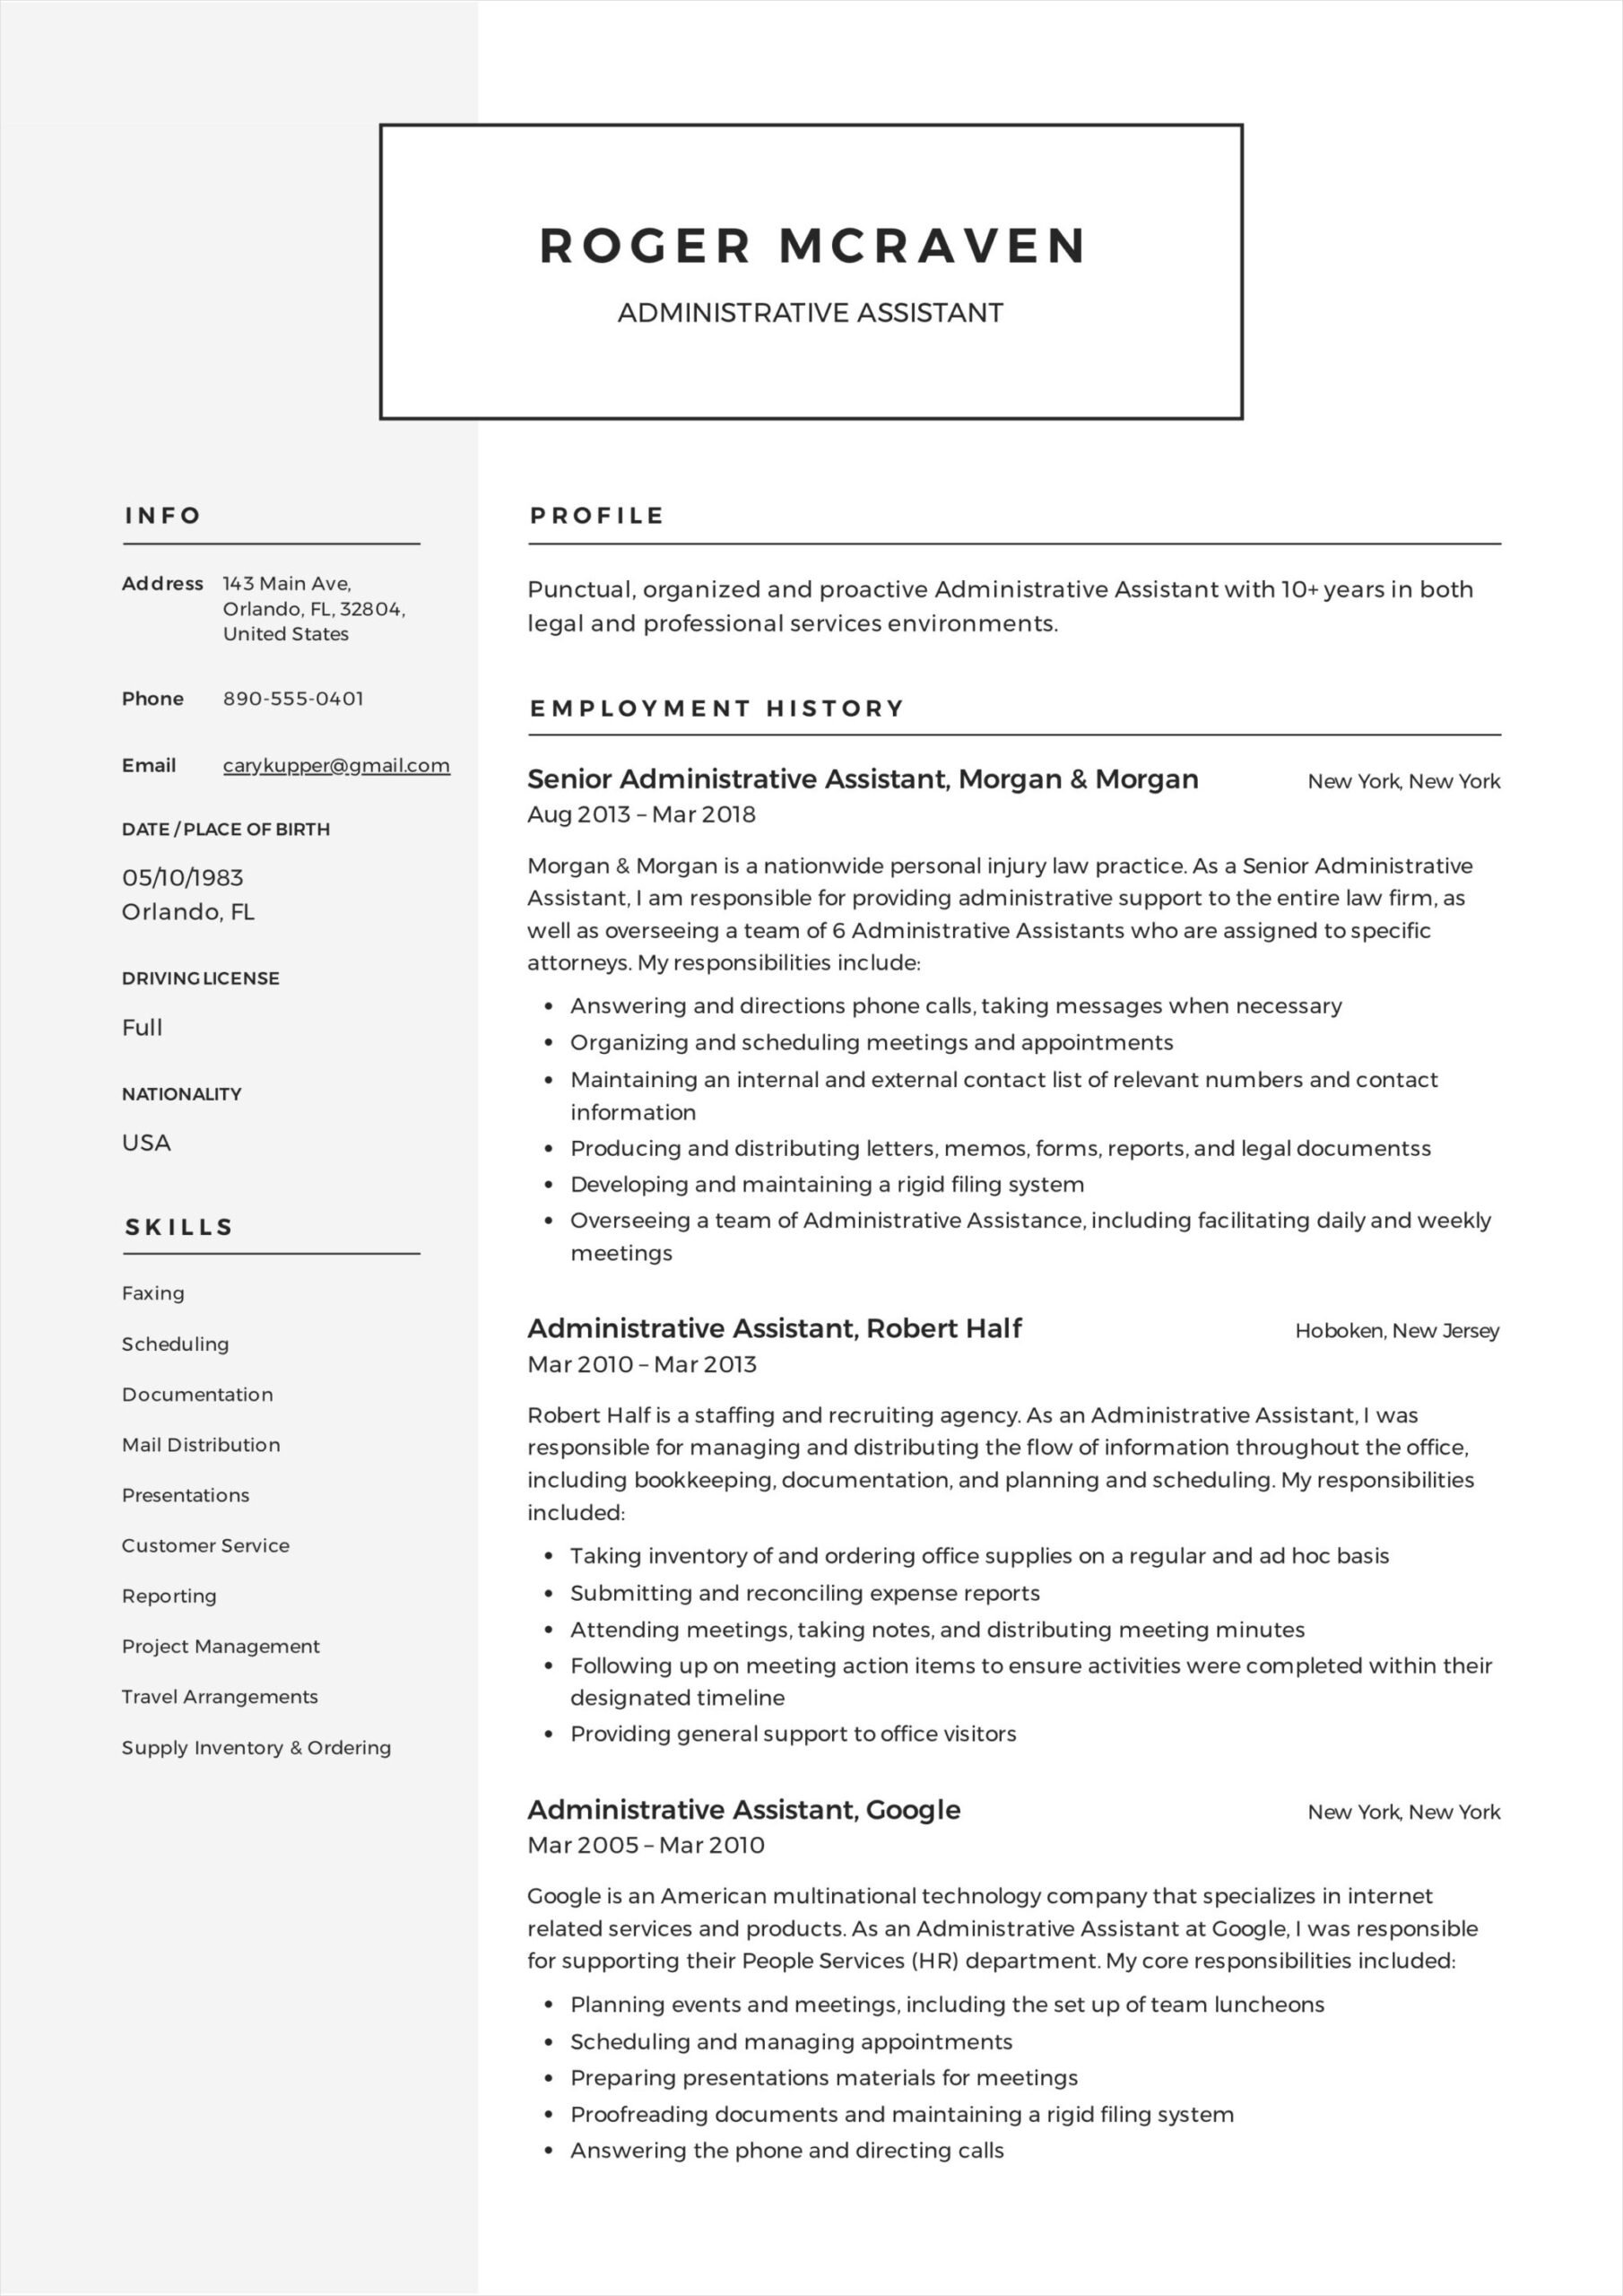 resume template for administrative assistant